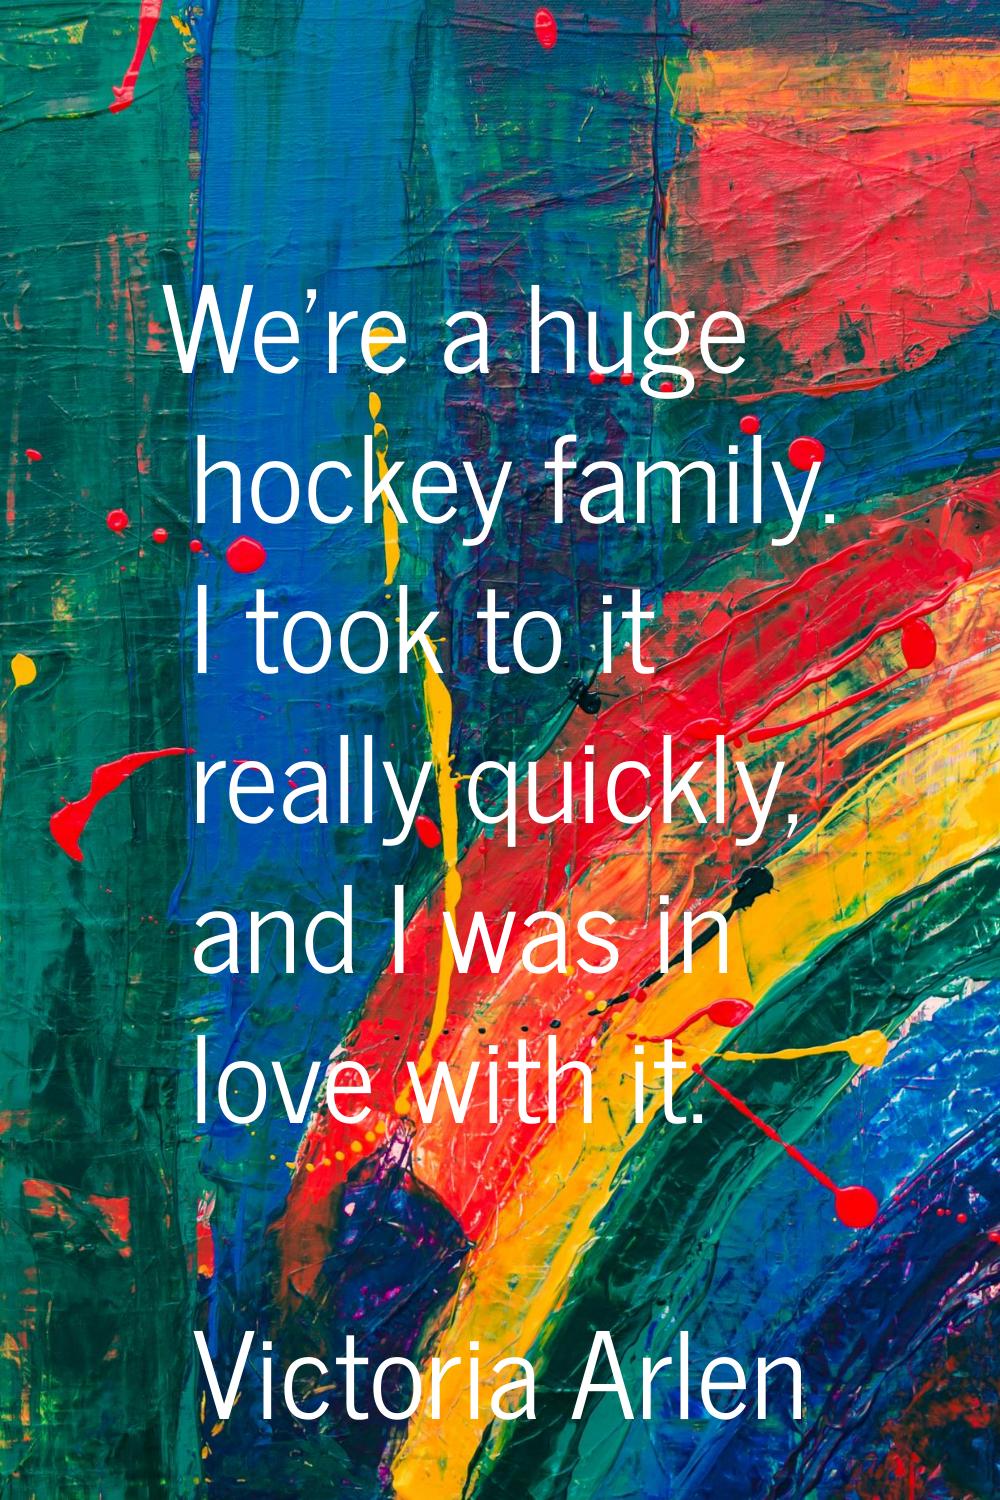 We're a huge hockey family. I took to it really quickly, and I was in love with it.